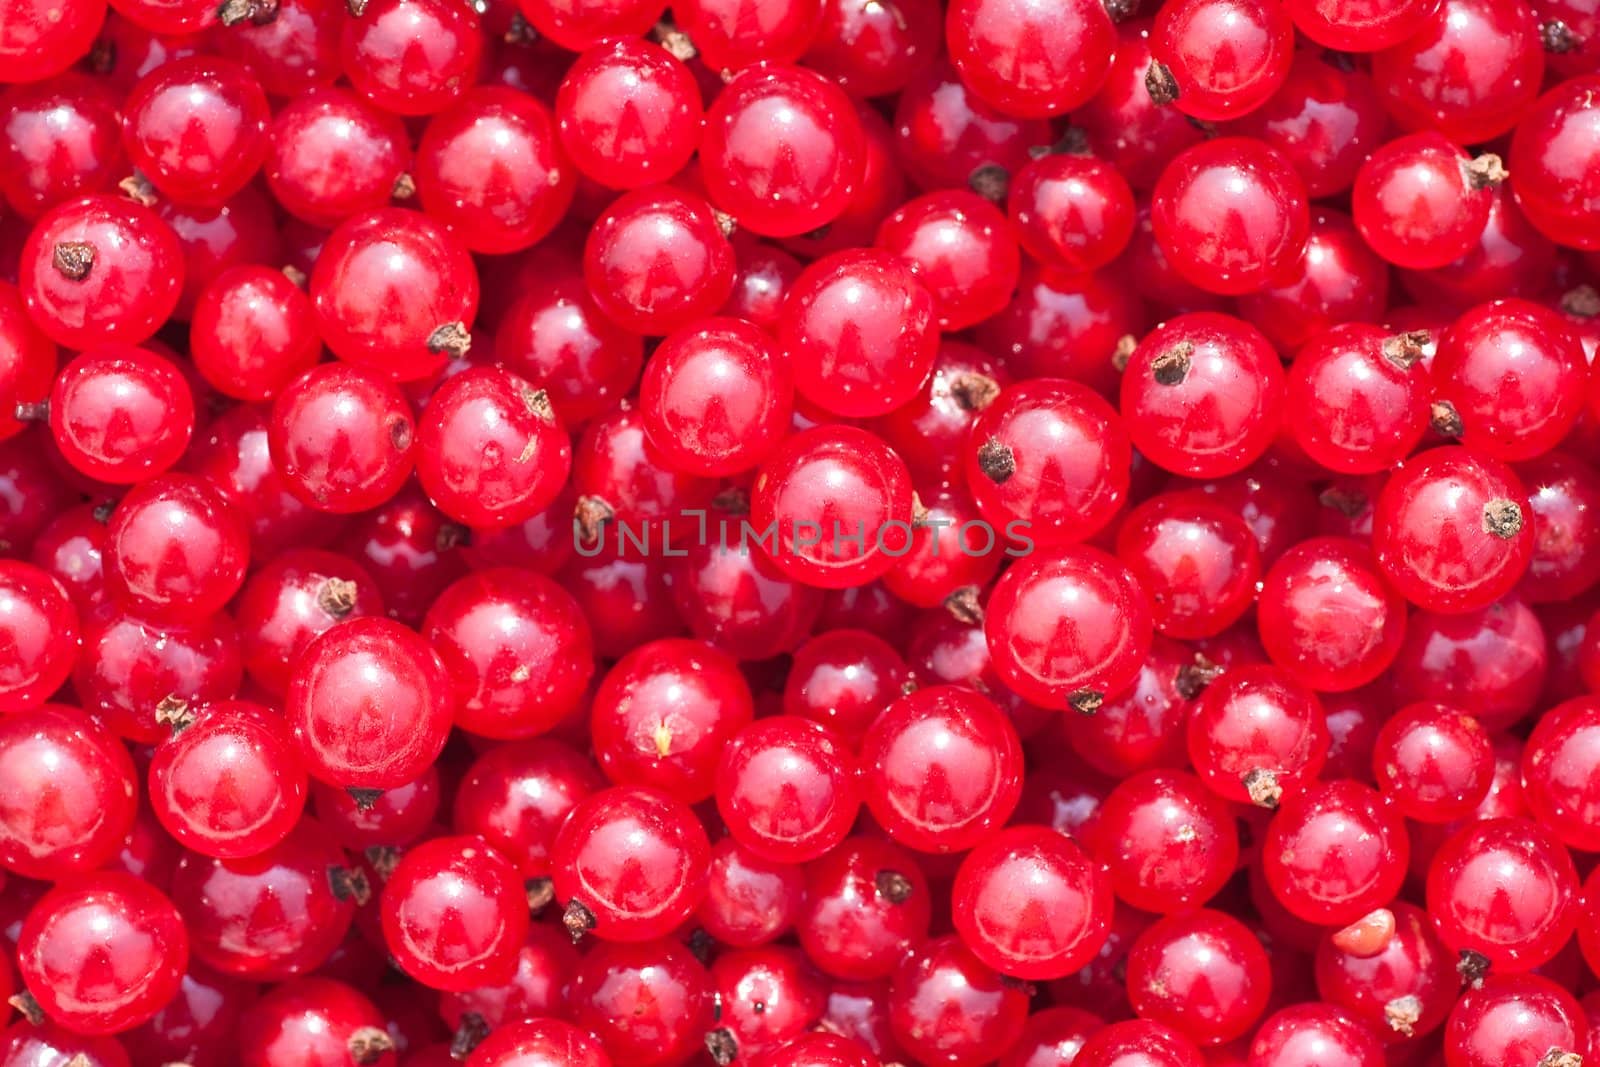 Natural background of berries of a red currant